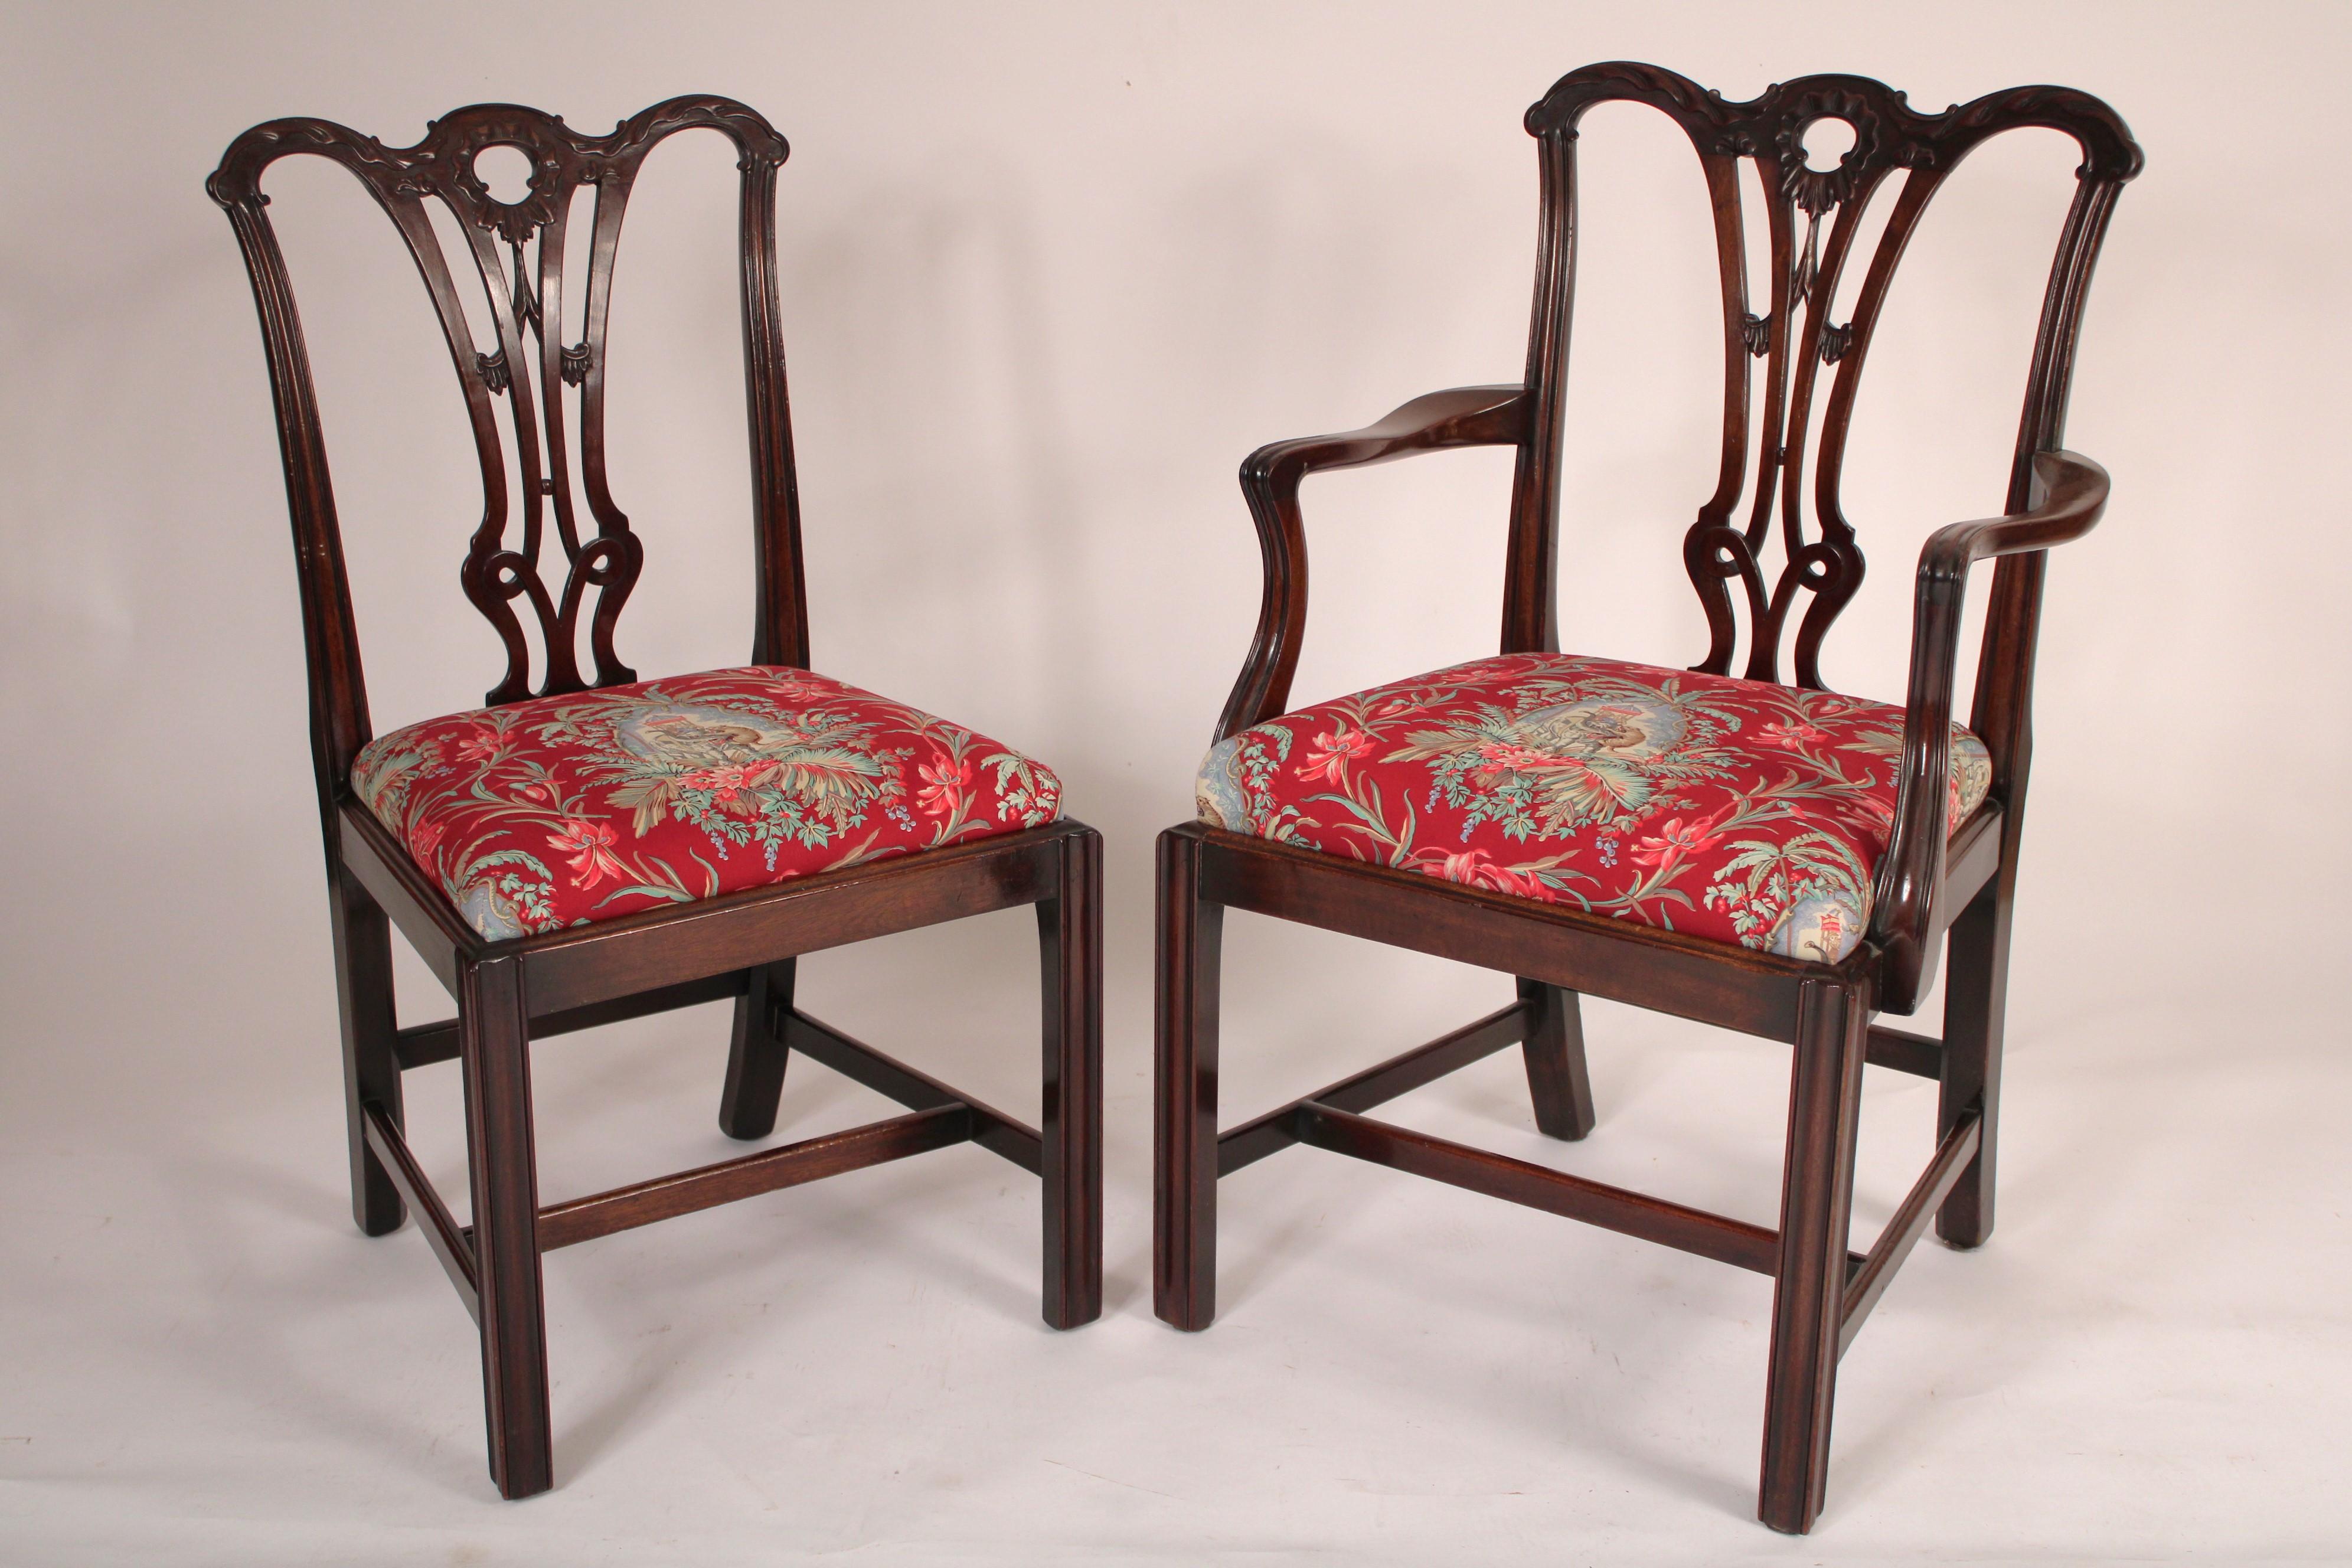 Set of 8 Chippendale style mahogany dining room chairs, circa 1920's. With a carved cupids bow crest rail, a pierced back splat with swag carving, molded stiles, resting on Chippendale style 5 sided legs, joined by H shaped stretcher bars. With